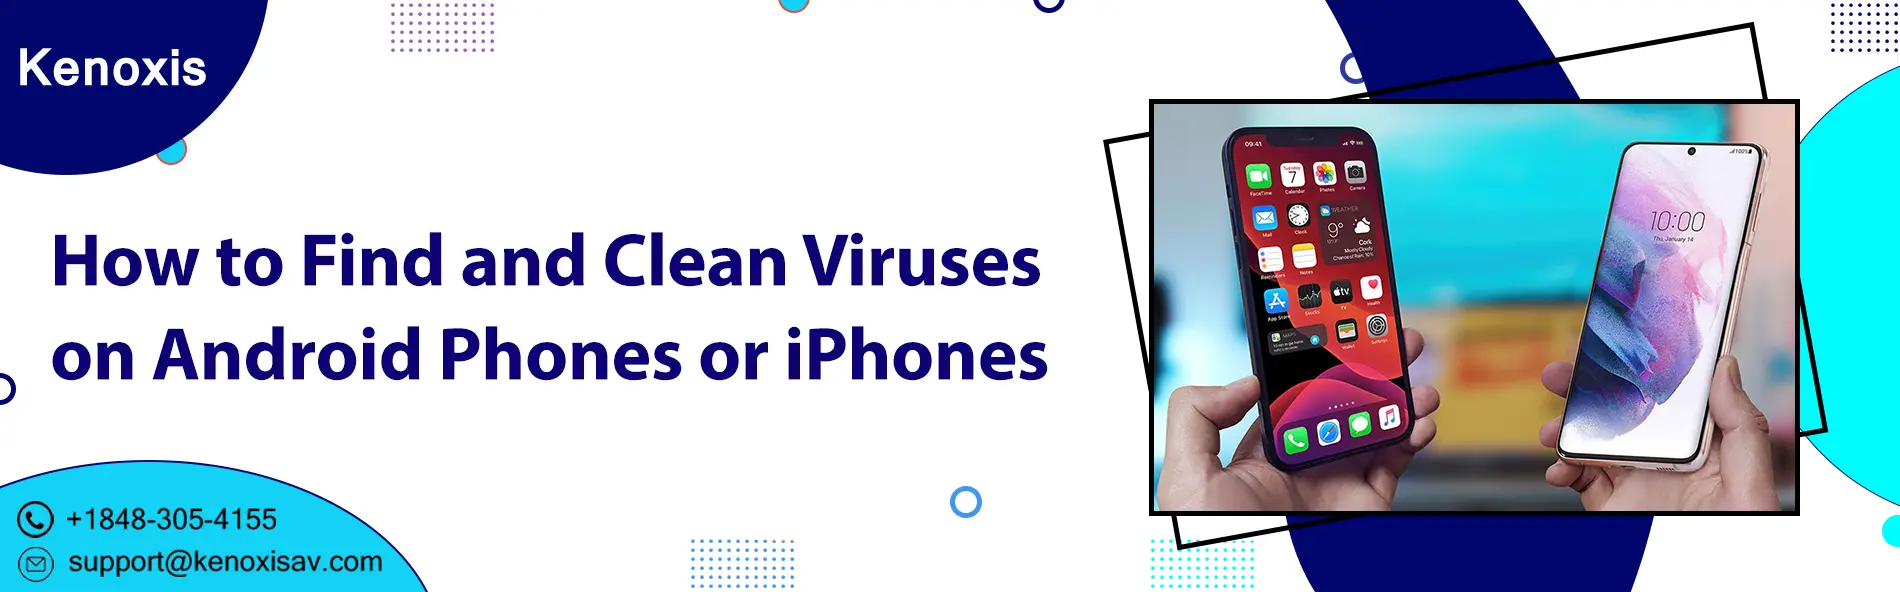 Find and Clean Viruses